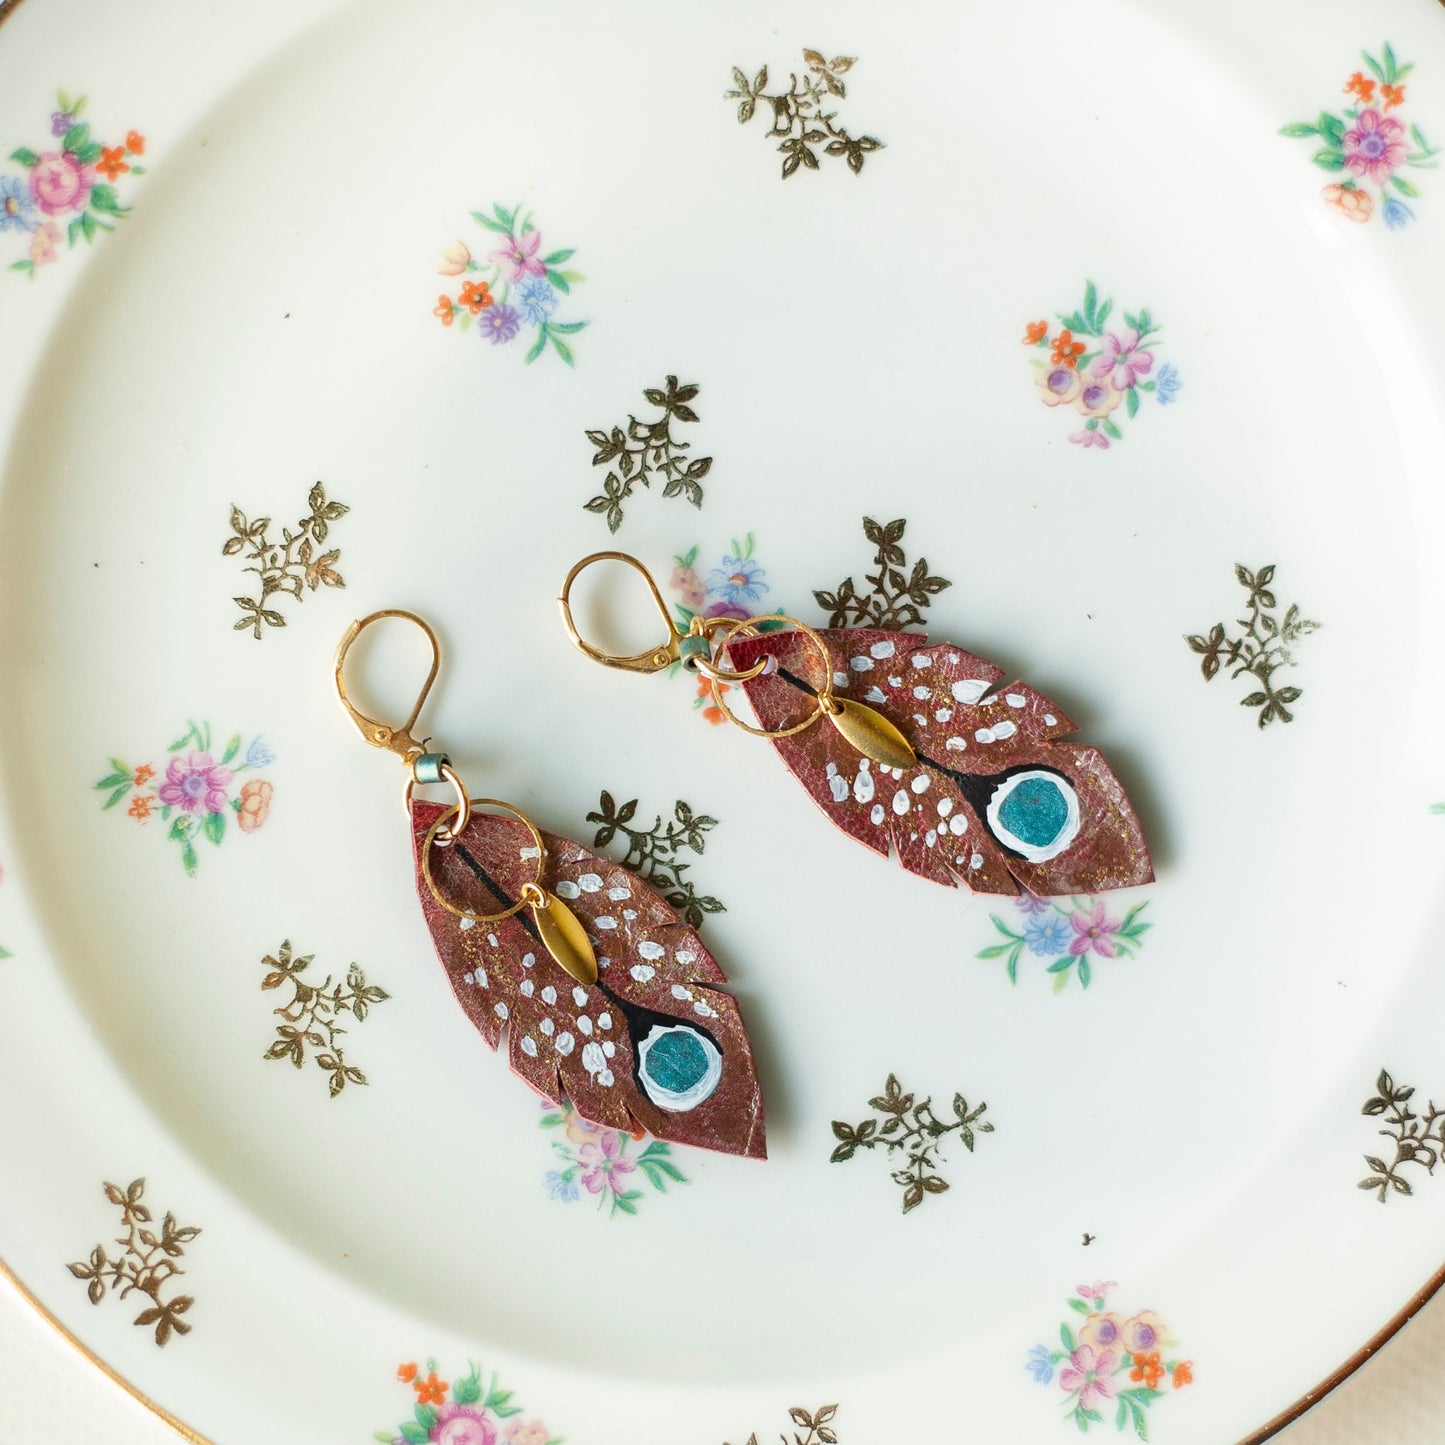 Plume de Paon earrings in brown white blue leather